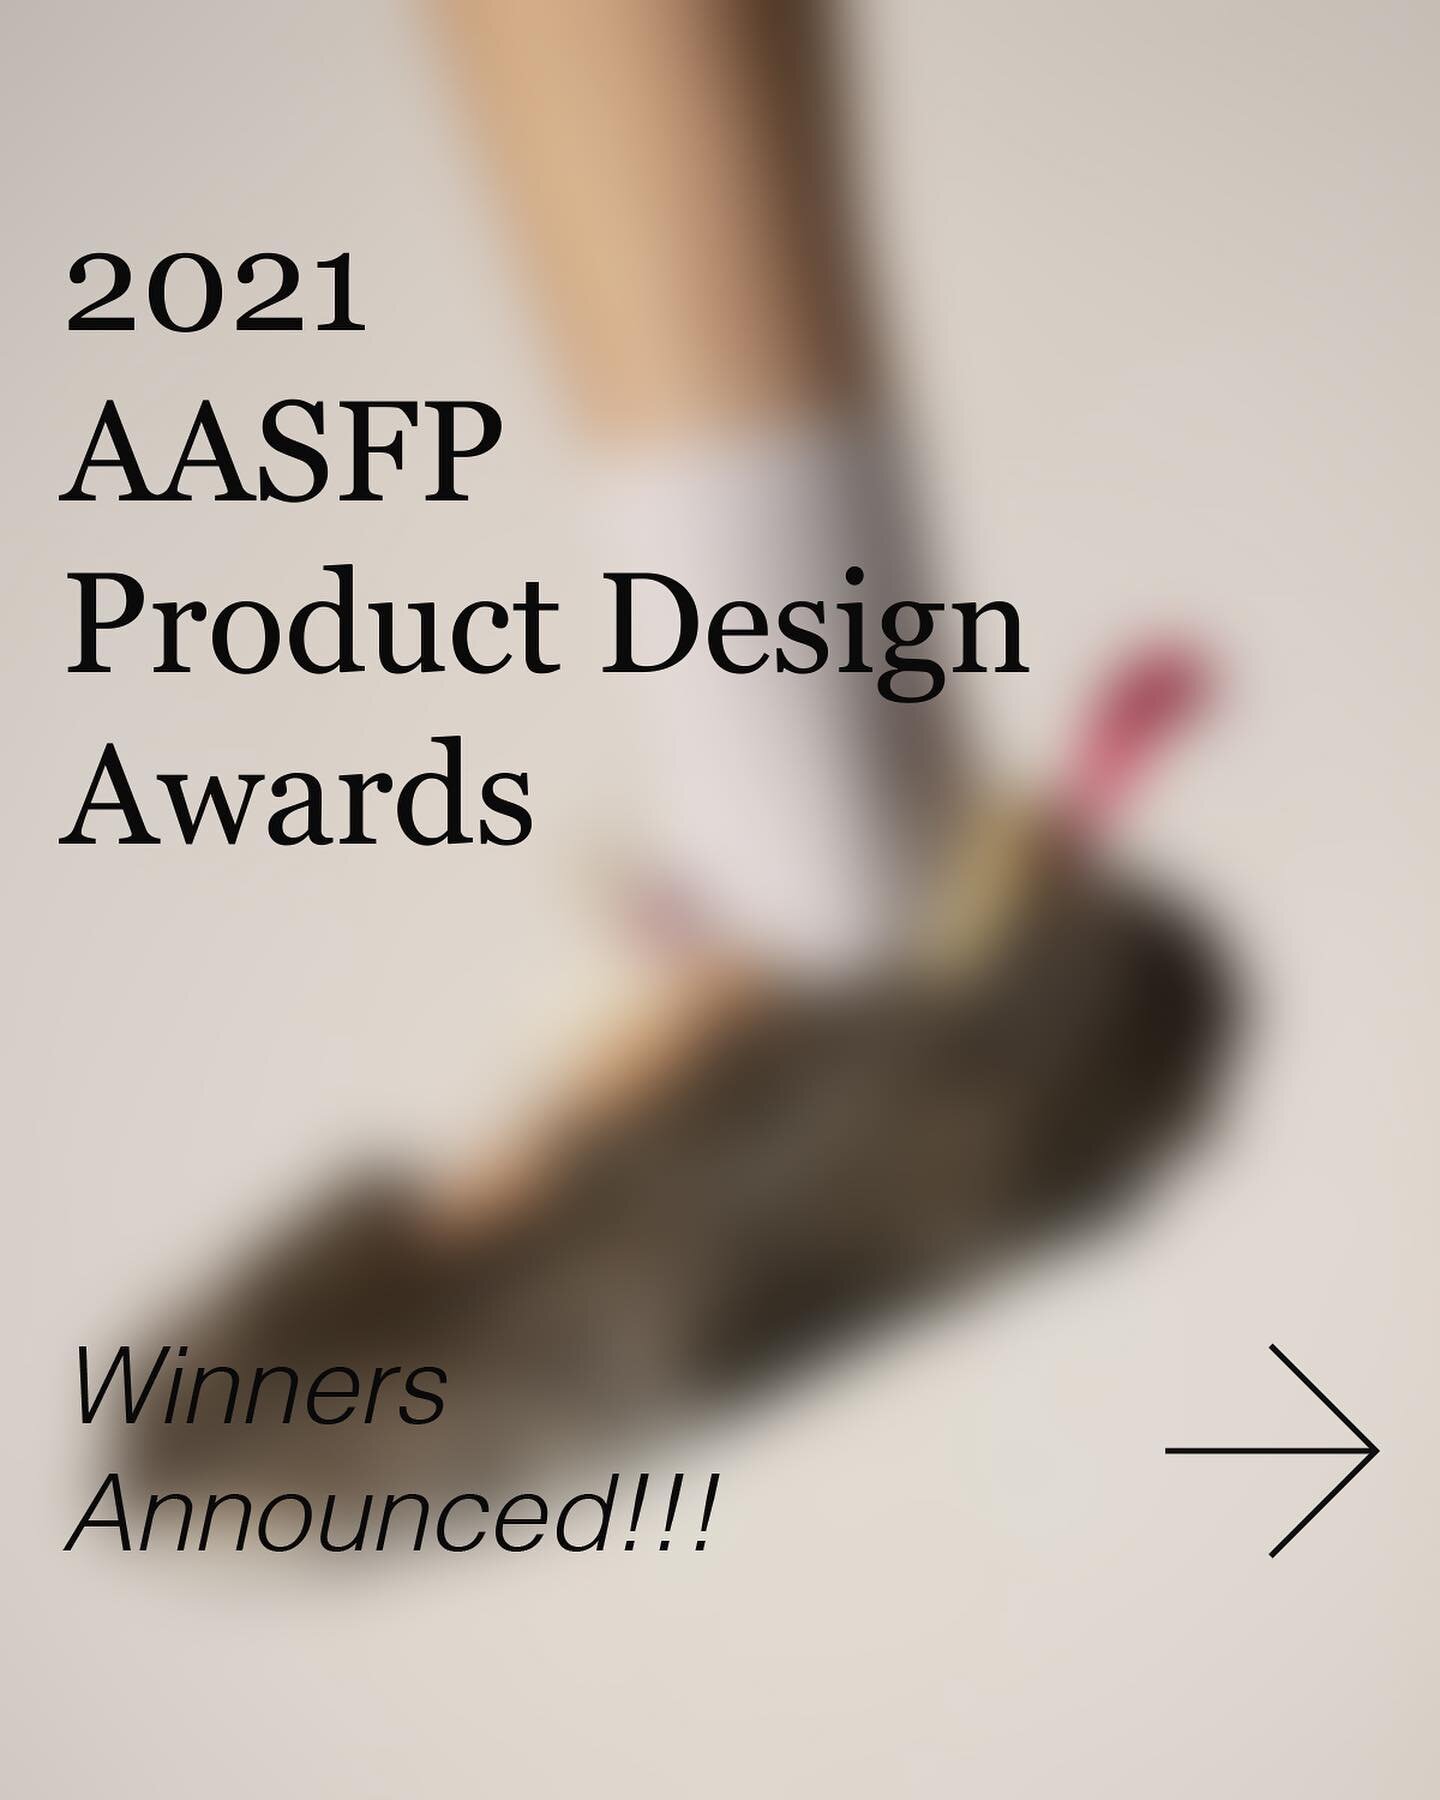 Congratulations to our&nbsp;@uo.productdesign &amp; @uosportsproductdesign students on their success!

Buzz Smith | Genius: Apparel collection | 1st&nbsp;place, $5000 

Anna Geffen @ageffdesigns | Sellie: Montessori inspired toys | 2nd place, $3000 
